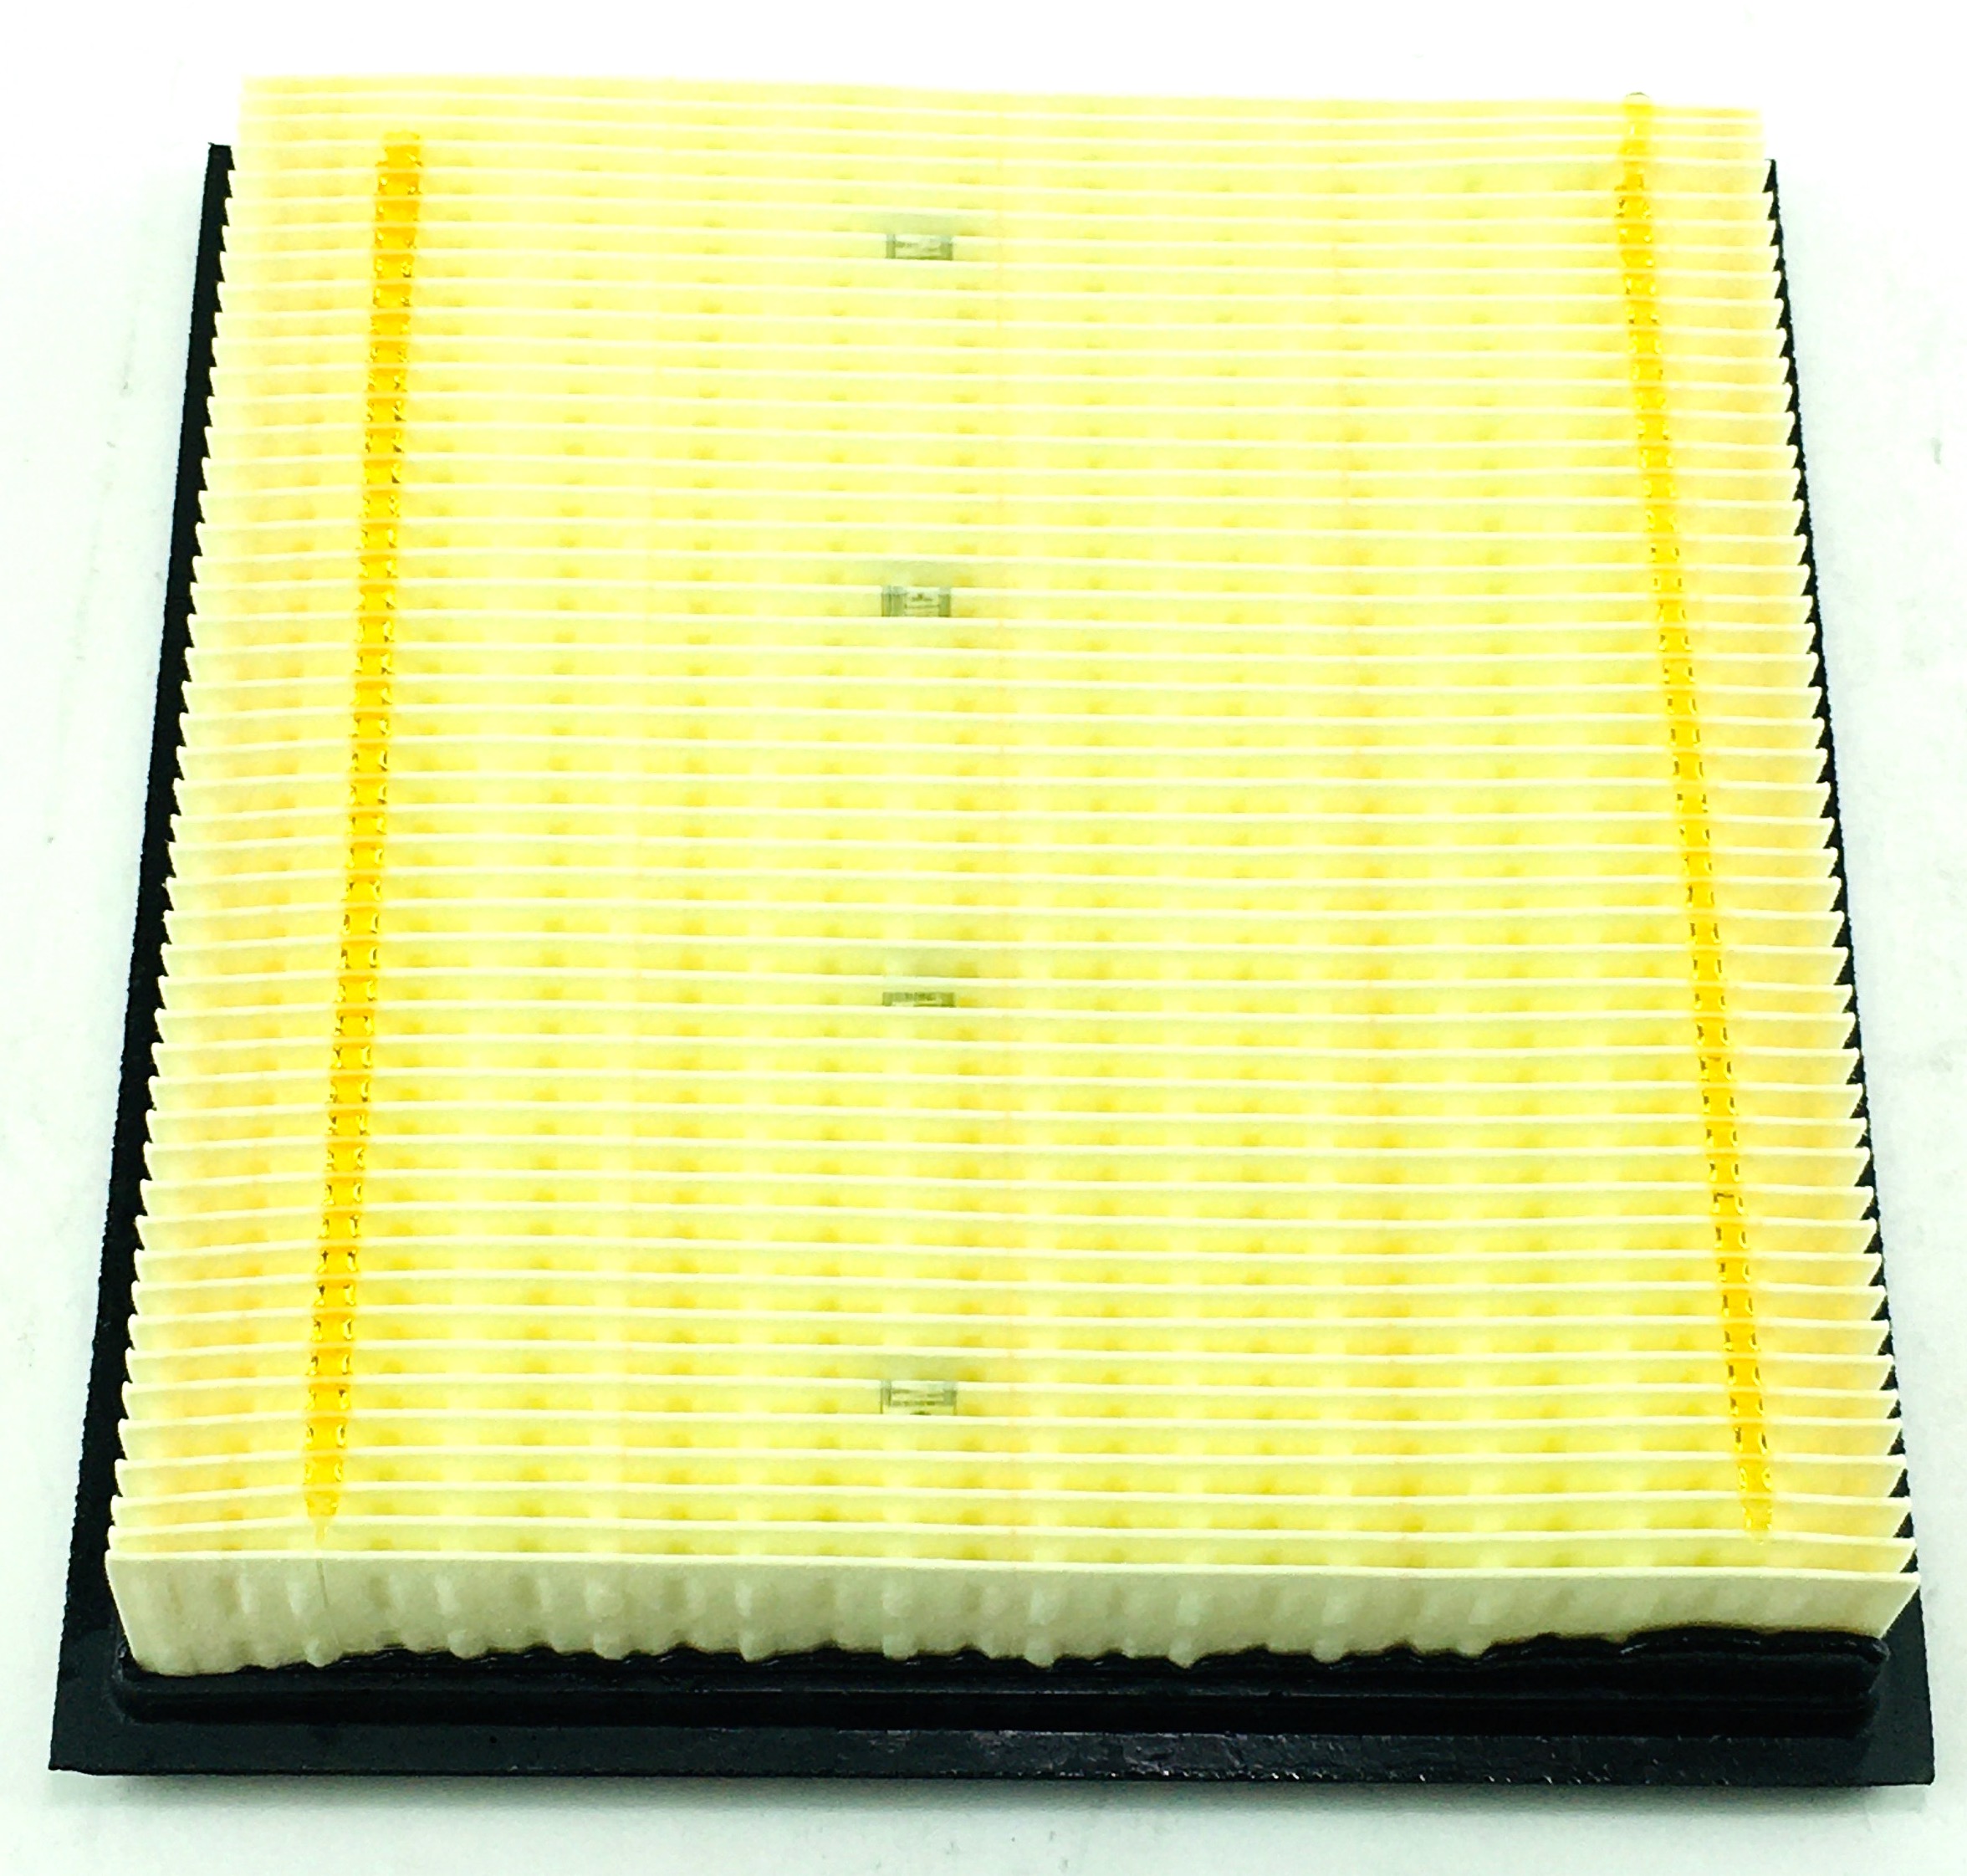 New OEM Motorcraft FA-1883-B7 Ford 7C3Z9601A Genuine Air Filter Free Shipping - image 2